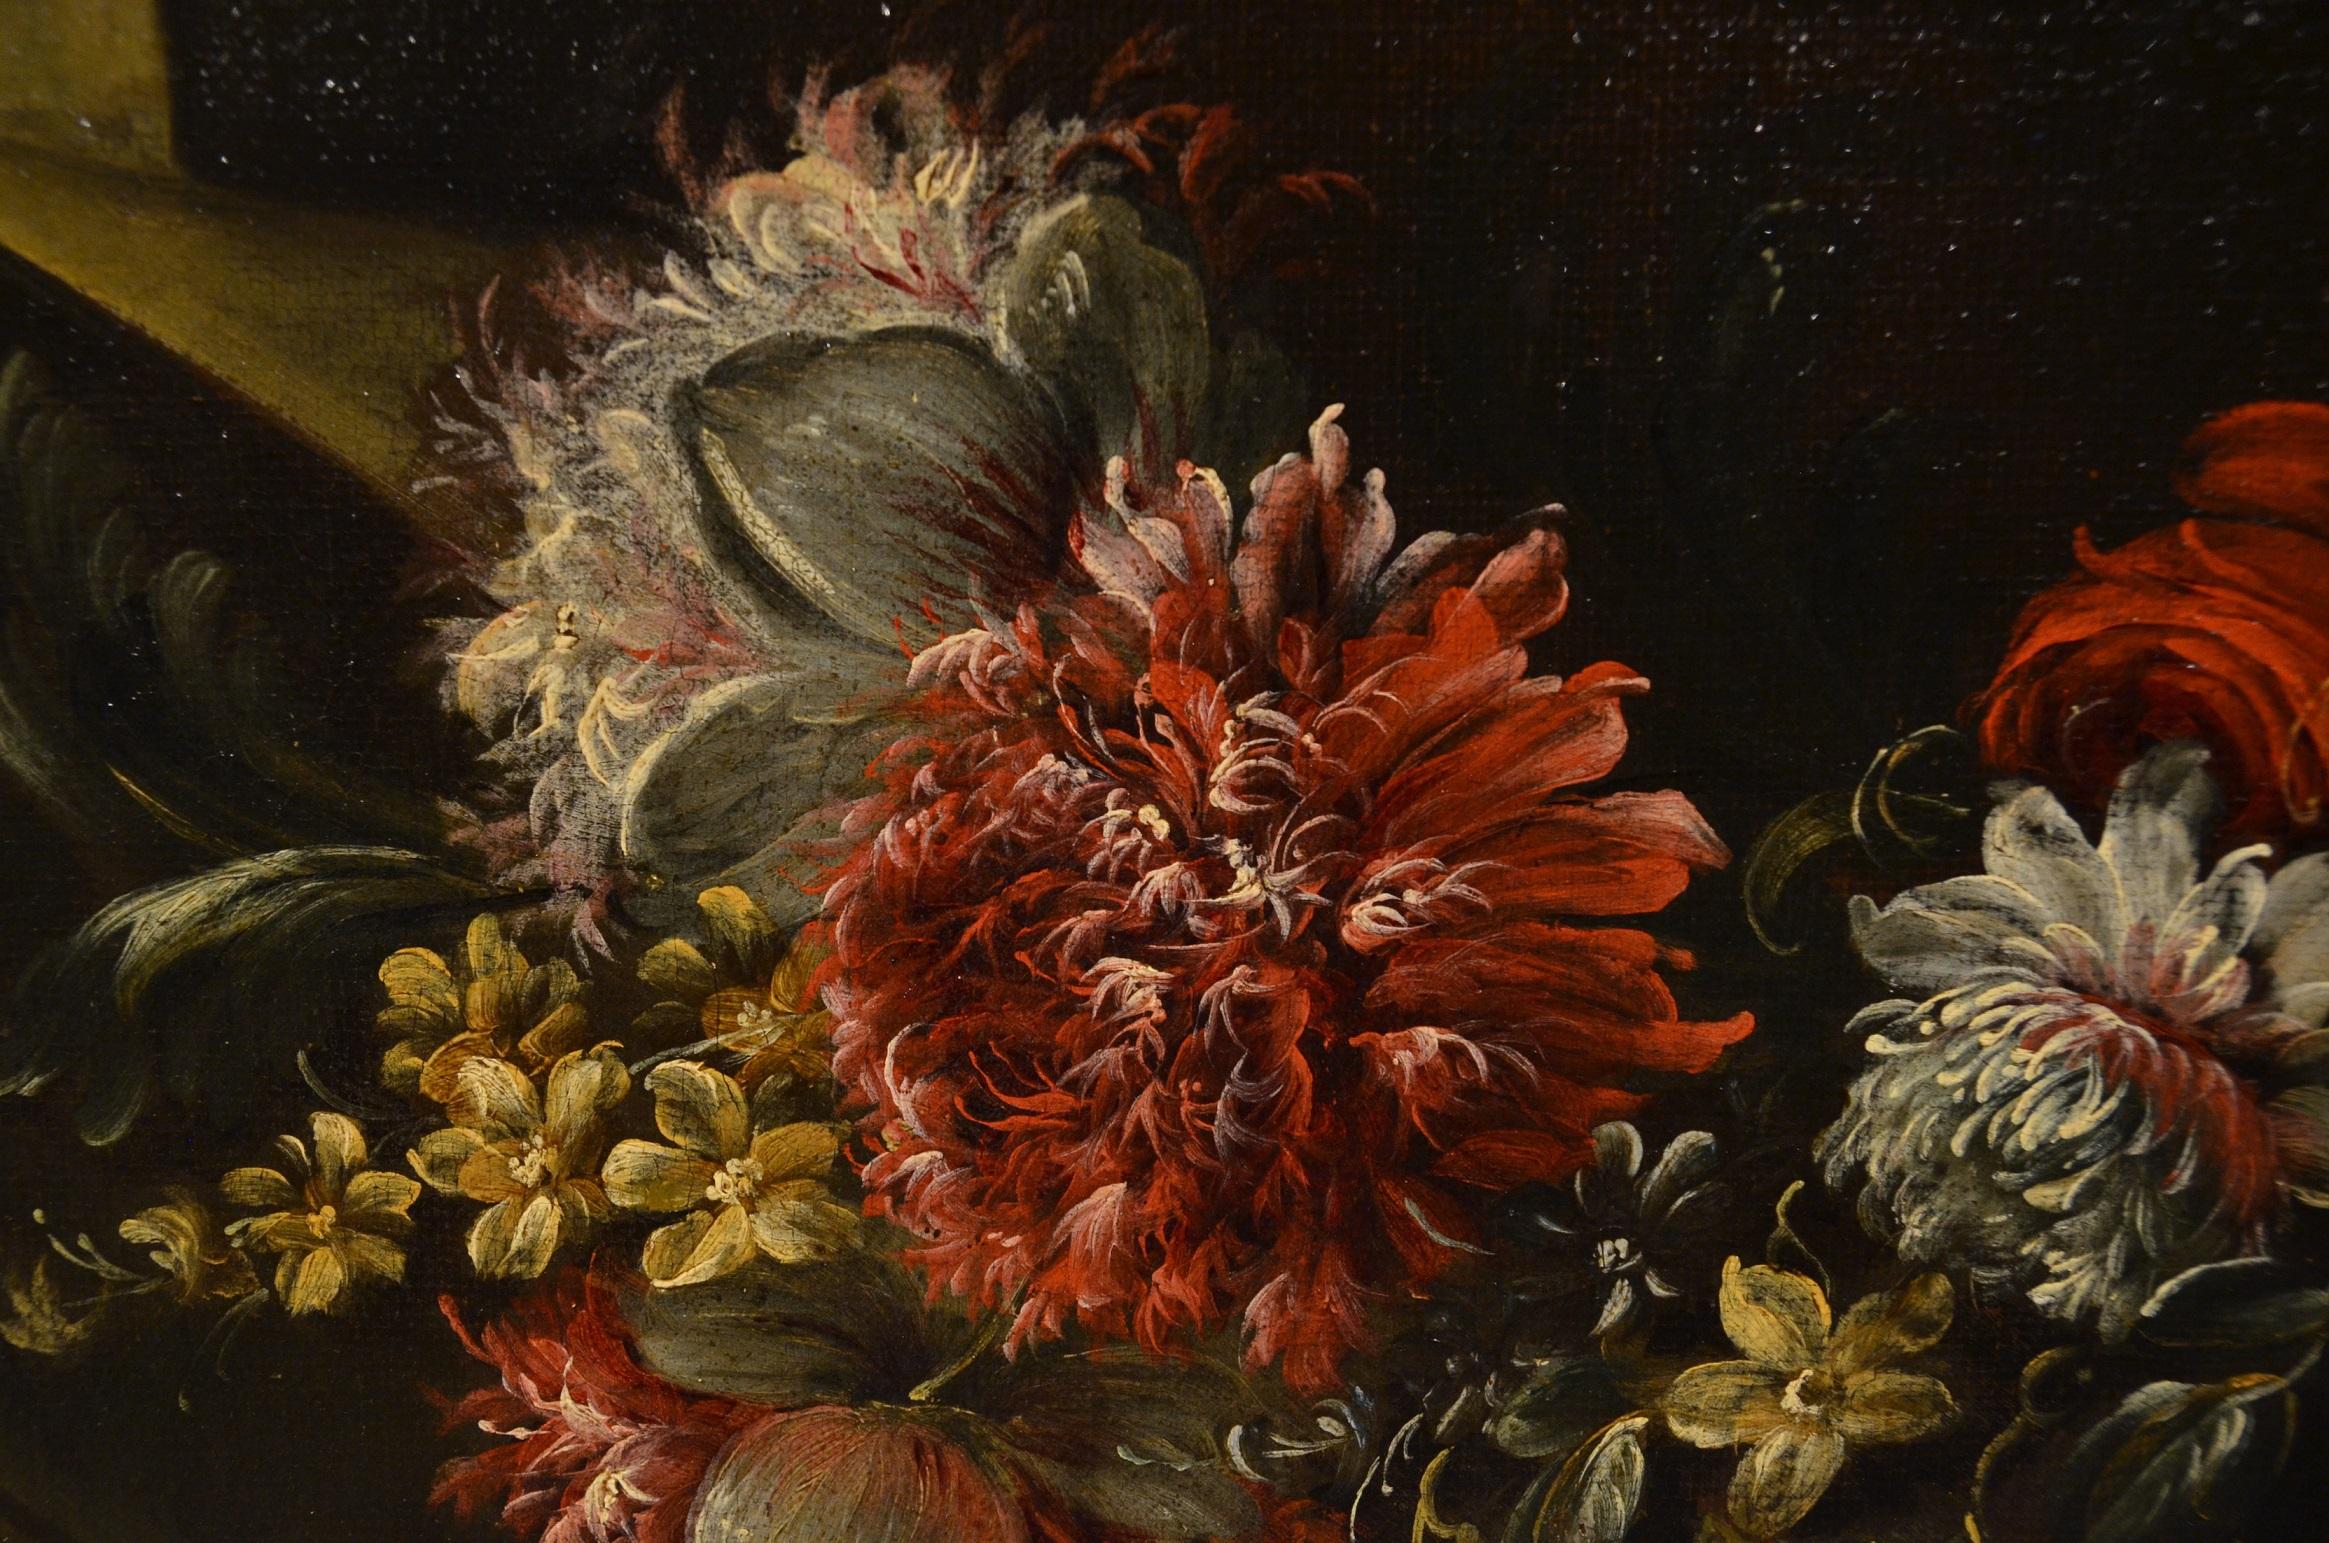 Pieter Casteels III (Antwerp 1684 - 1749 Richmond) circle 
Floral still life
Signed lower left, on the stone: P Casteels
About 1730
Oil painting on canvas
Cm. 57 x 103, In frame 67 x 112

Expertise of Prof. Ferdinando Arisi

The painting is